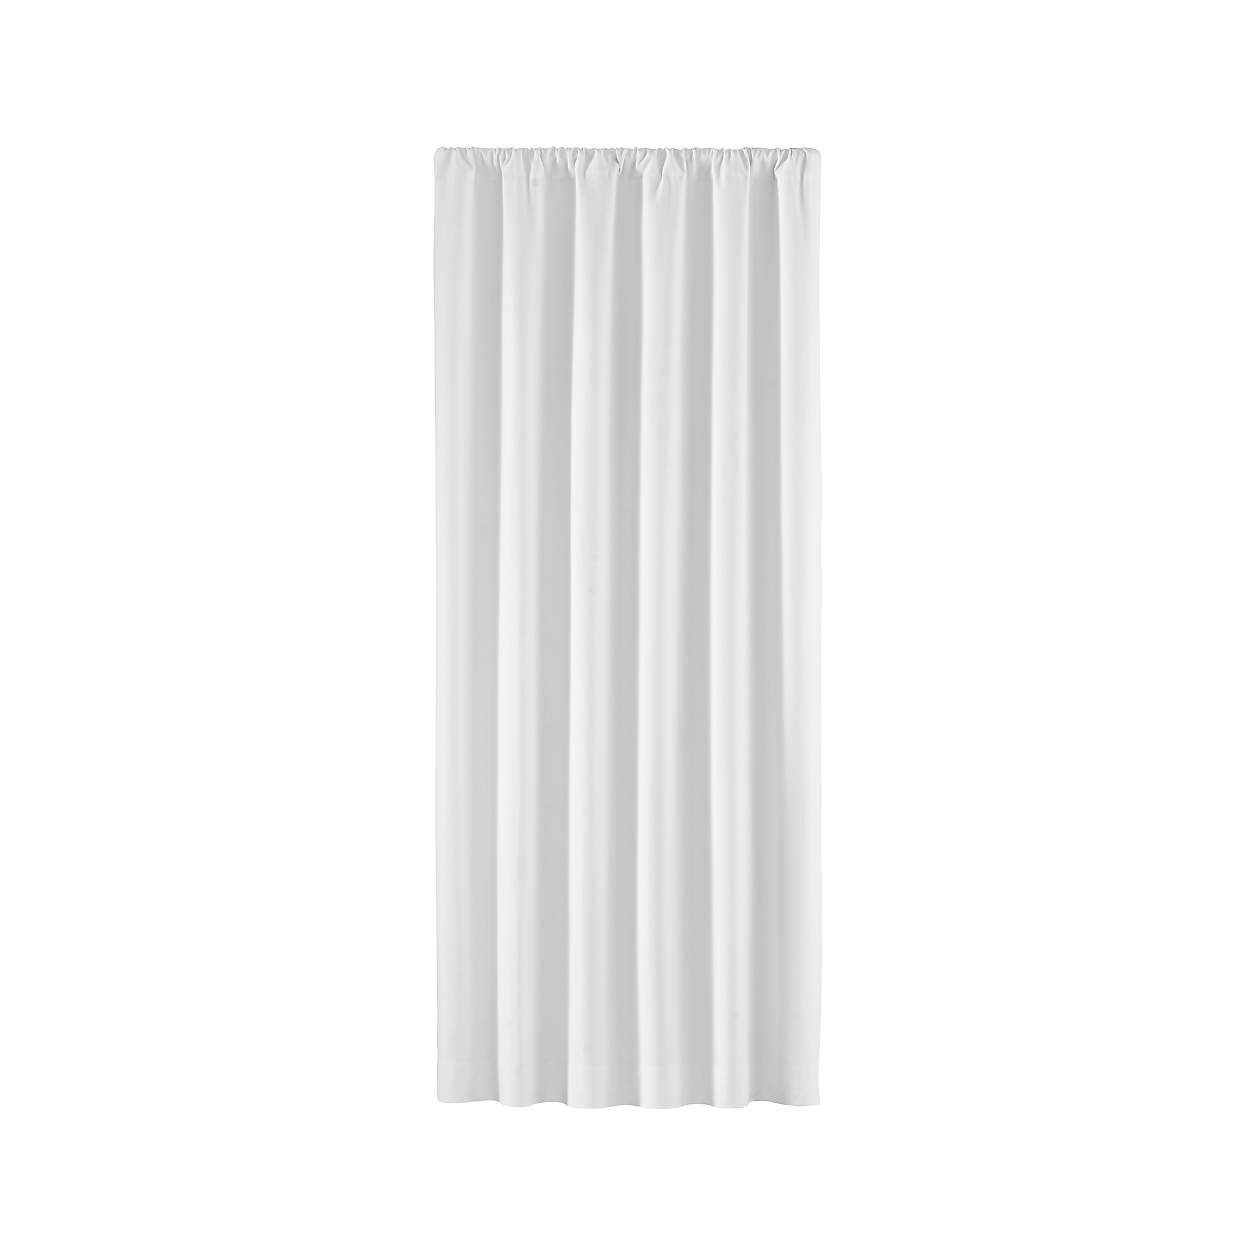 Wallace Blackout Curtains, White, 52" x 84" - Image 4